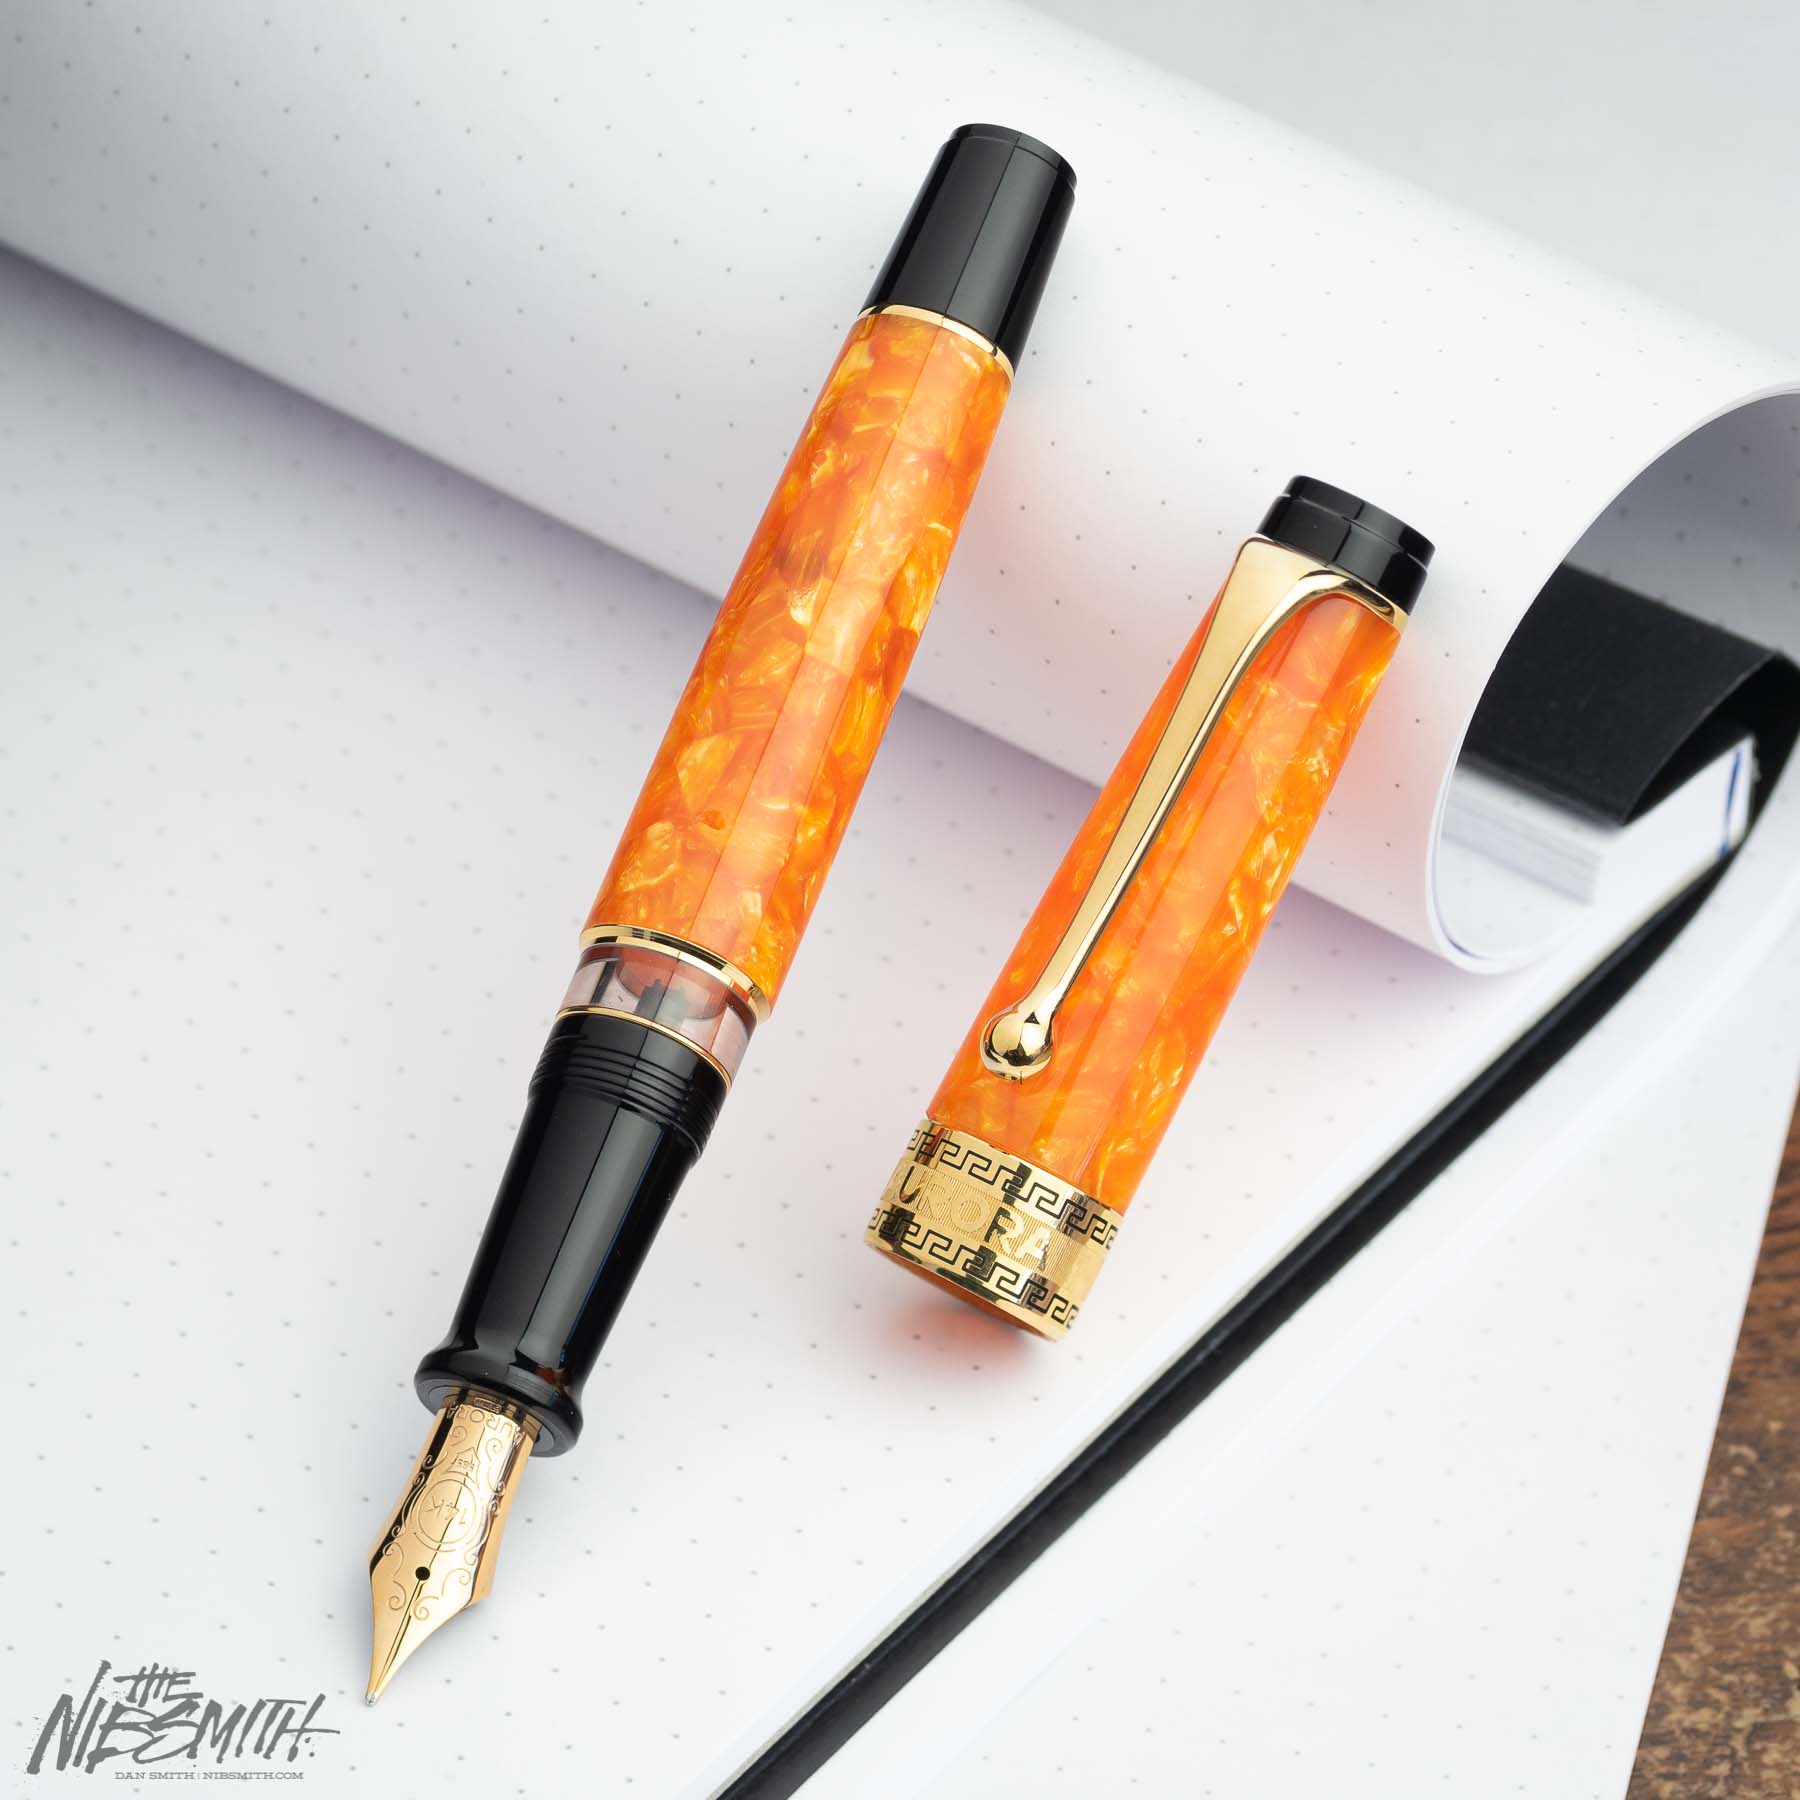 NEW In Original Package , Glass Optima Calligraphy Pen With Black Ink!